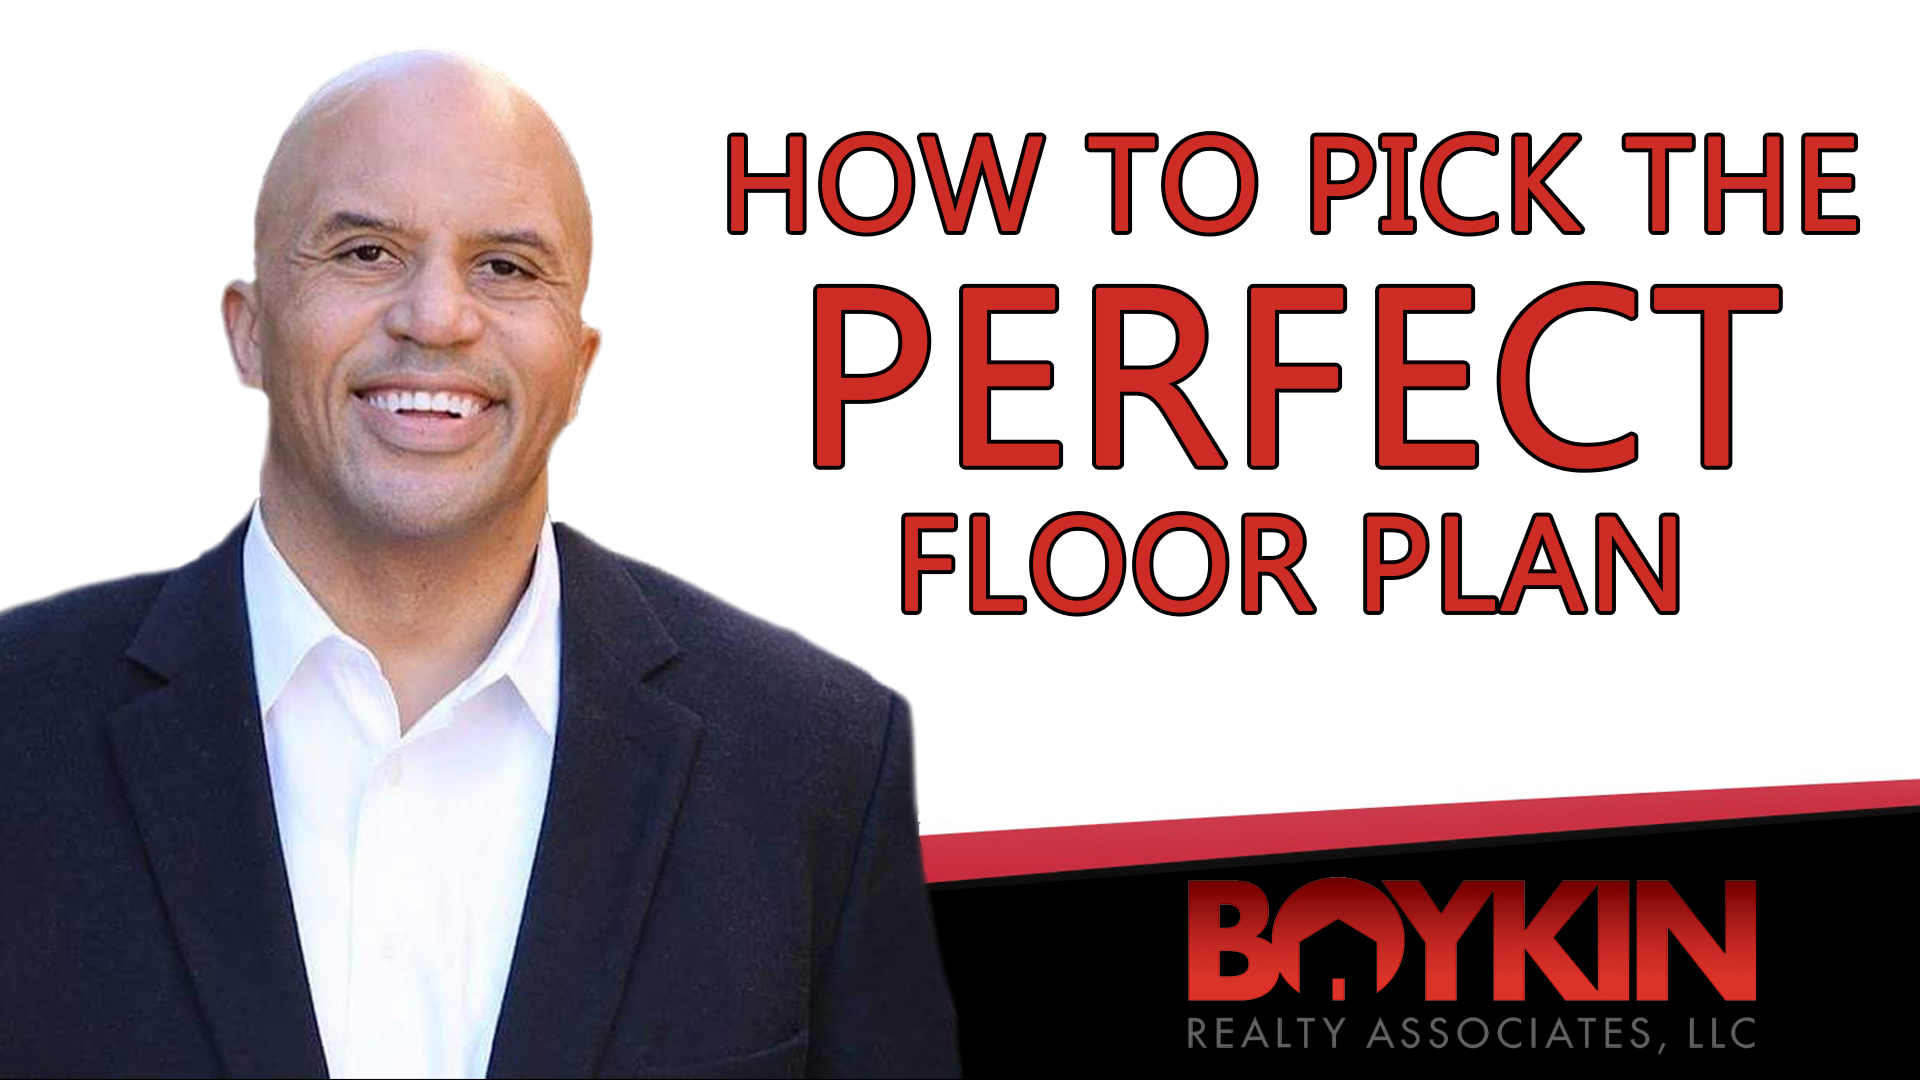 What Goes Into Picking the Perfect Floor Plan?